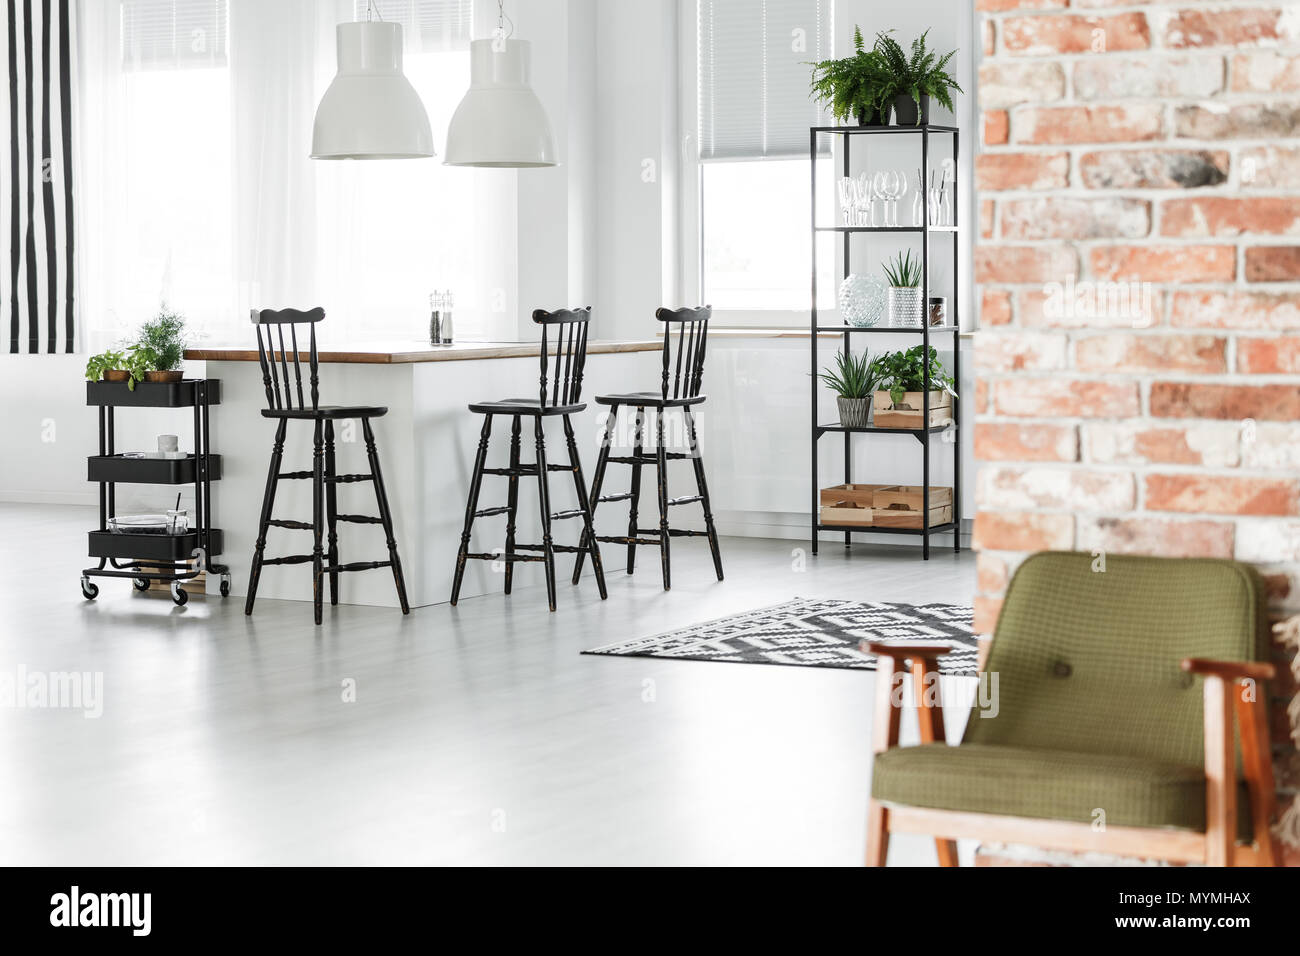 Retro green chair against red brick wall in room with black bar stools and kitchen island Stock Photo